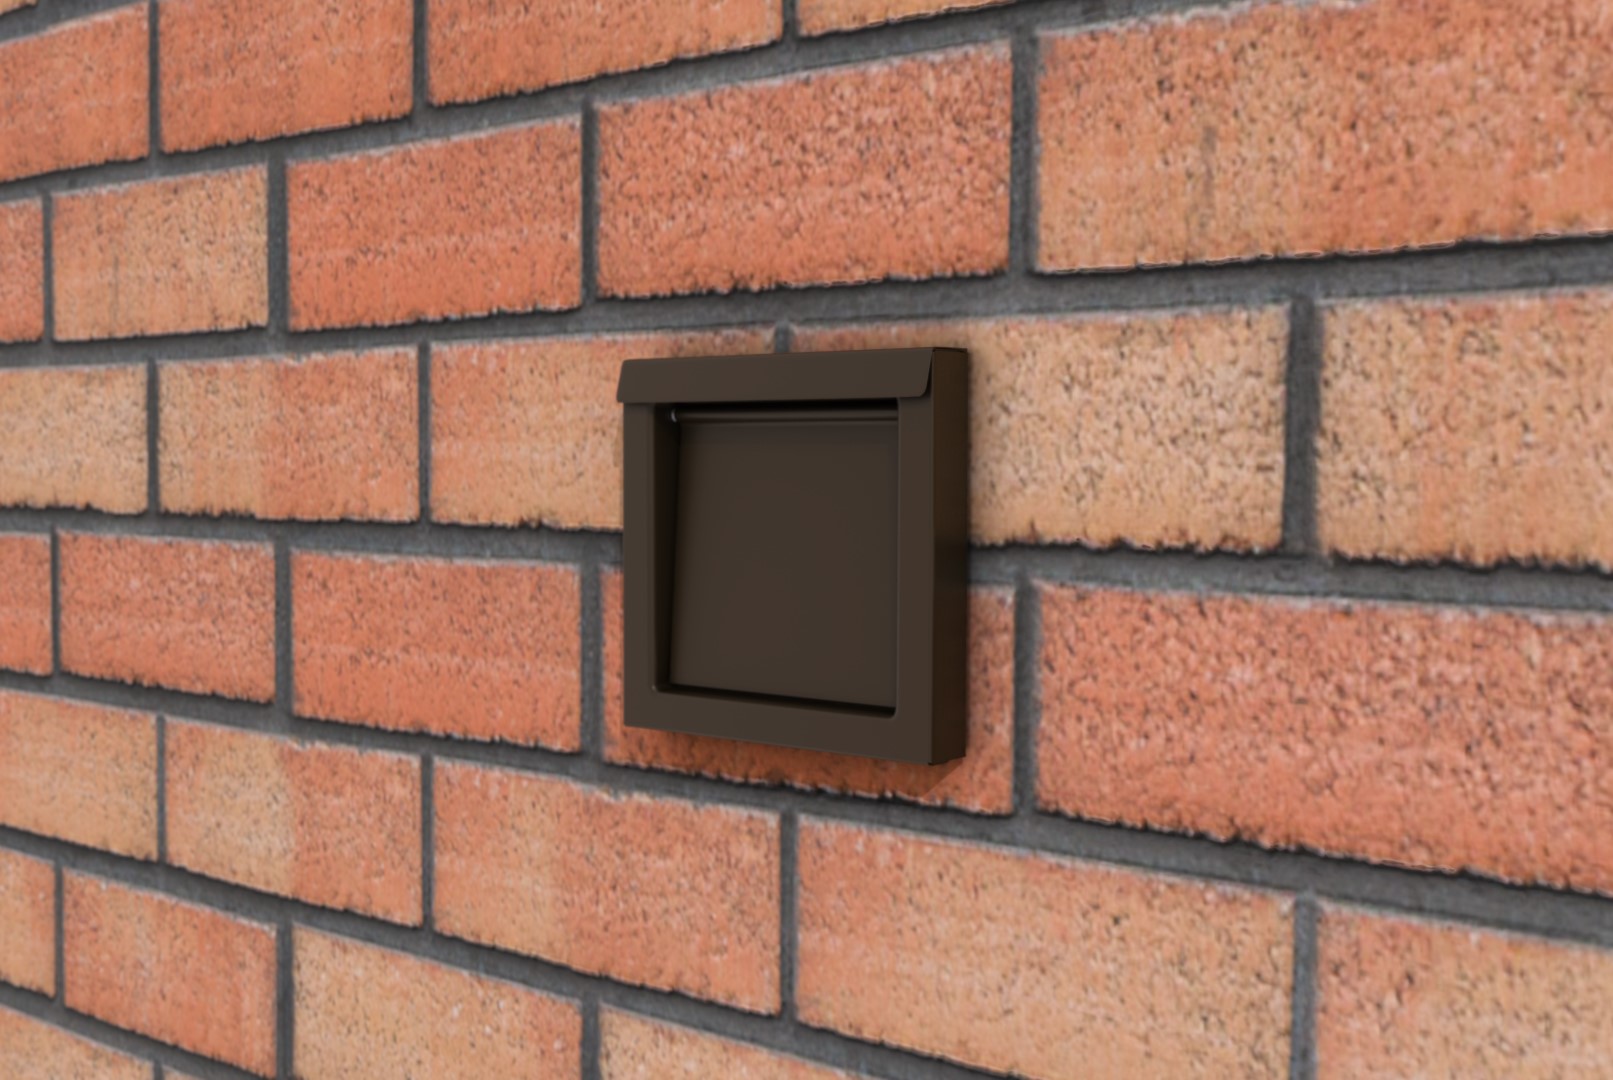 How To Install A Dryer Vent Through Brick